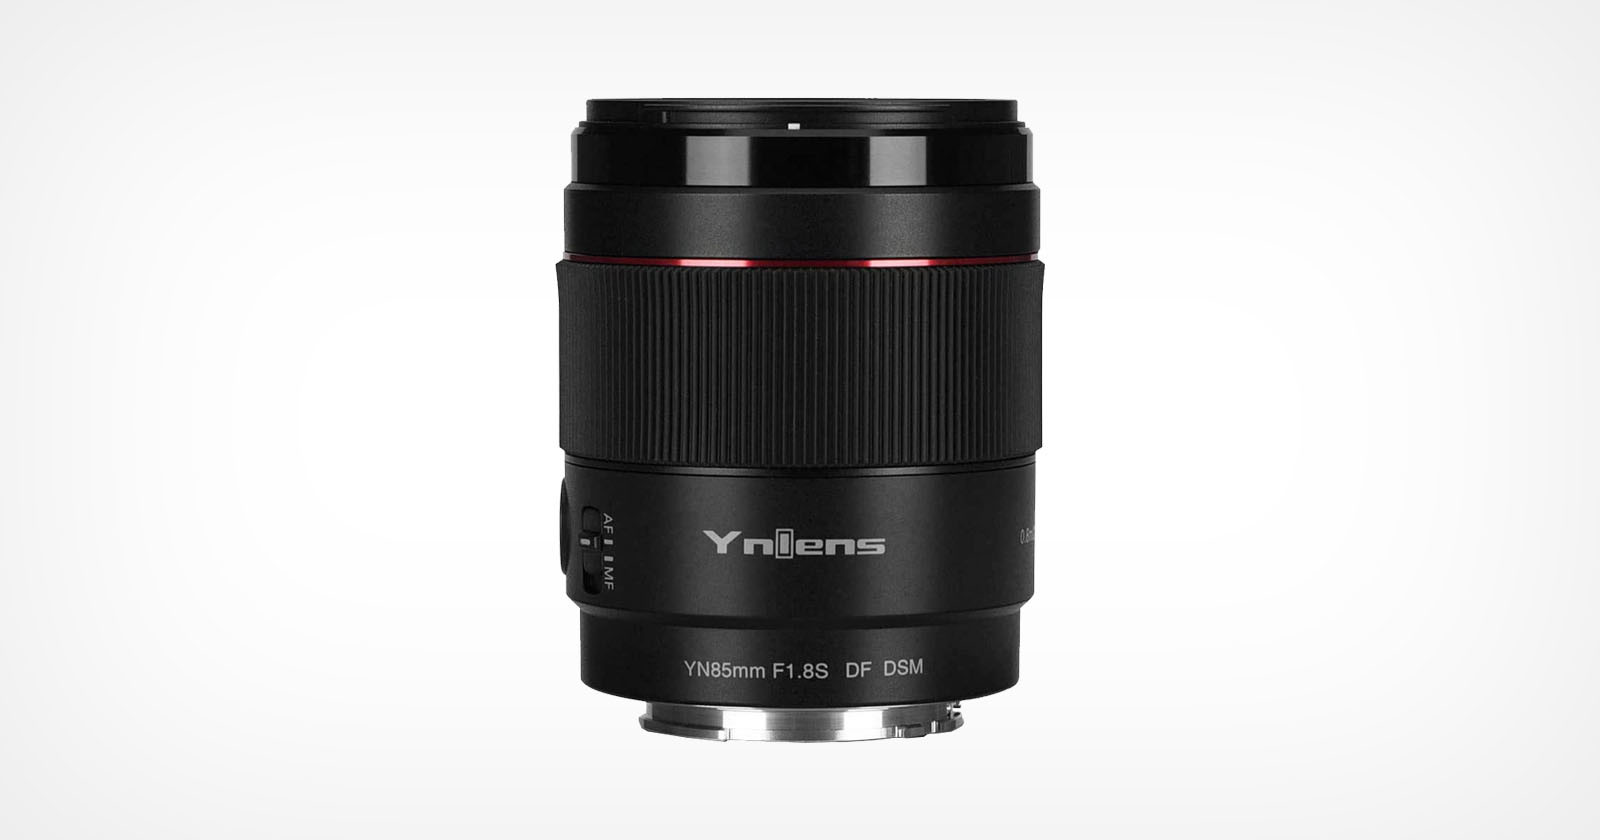 Hidden Gem: A Yongnuo Lens is Ranked in the Top 3 Best on DxOMark